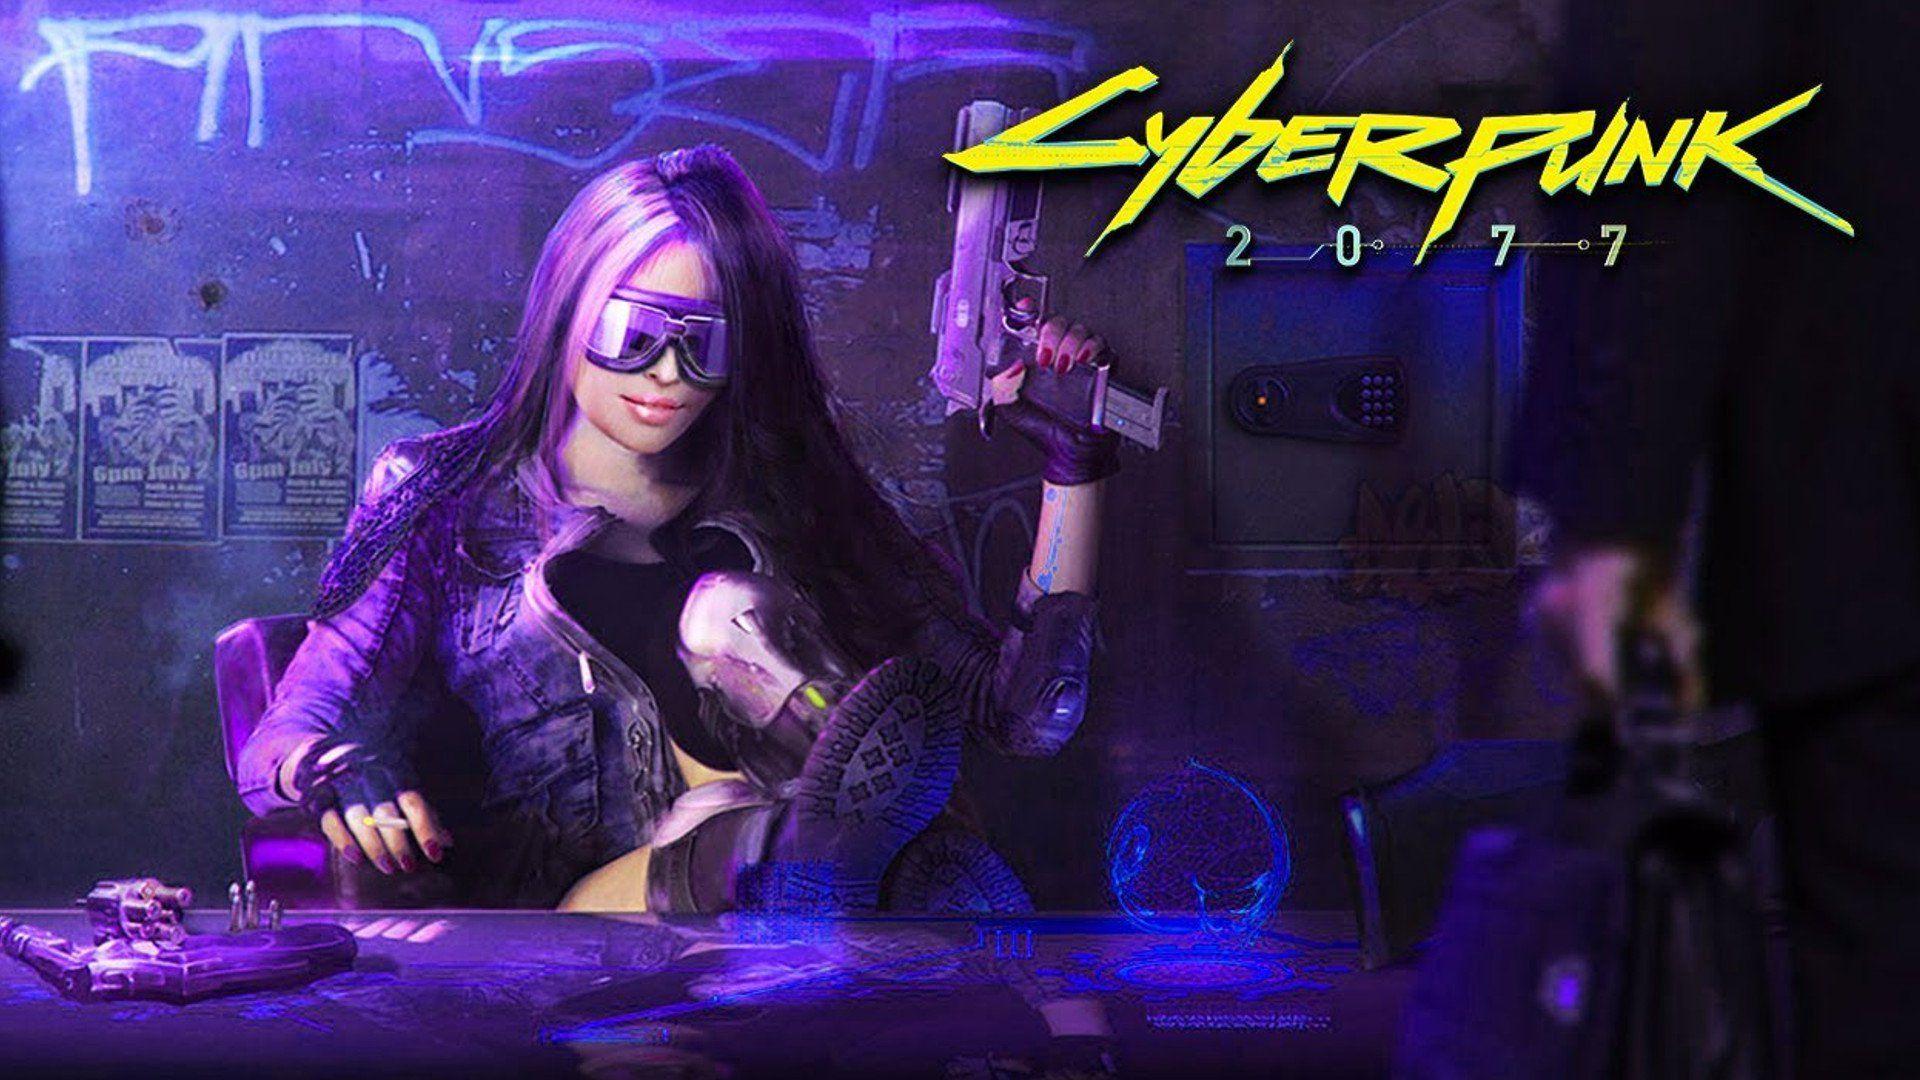 CD Projekt Red: Cyberpunk 2077 to Contain 'Online Elements'